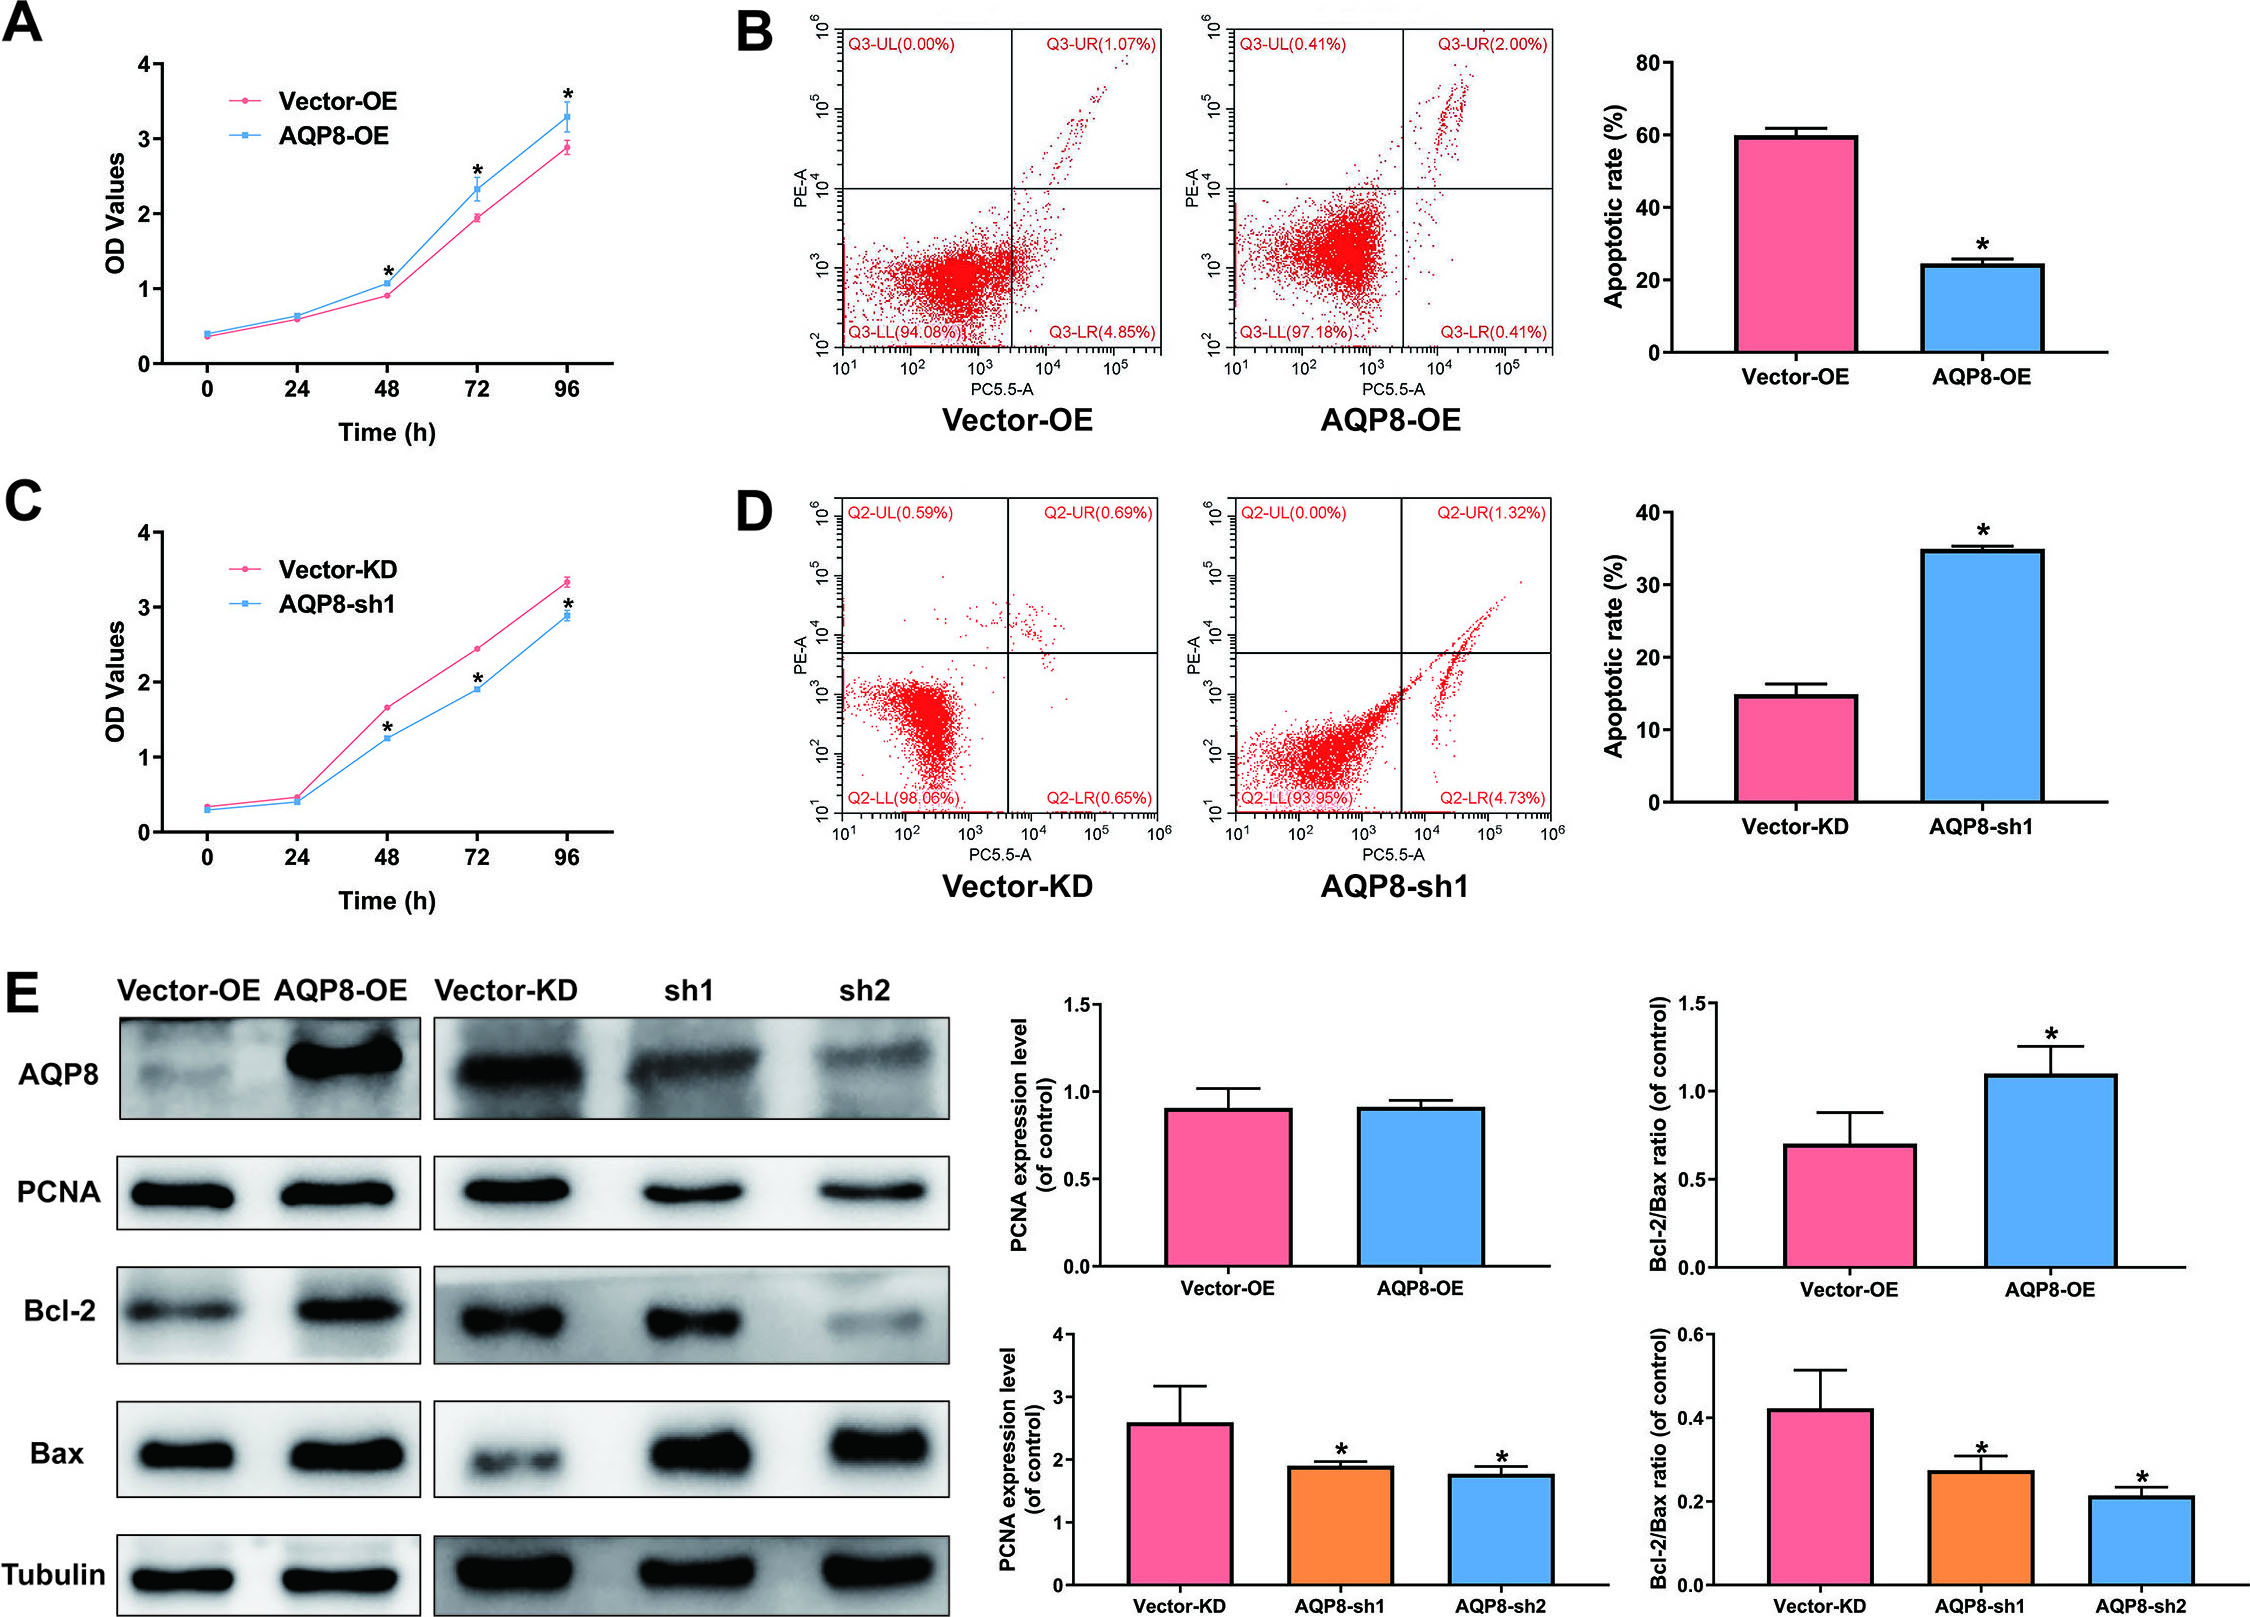 AQP8 increases viability and inhibits apoptosis in SiHa cells. A and C, Cell viability of SiHa cells were determined by CCK-8 assay after AQP8 overexpression or knockdown for 0, 24, 48, 72, and 96 h. B and D, Apoptosis of SiHa cells after AQP8 overexpression or knockdown for 48 h was evaluated by flow cytometry assay. The data were shown as mean ± standard error of each group. Each experiment was performed three times. P*< 0.05 vs vector group. E, Expression of PCNA, Bcl-2, and Bax proteins in SiHa cells after AQP8 overexpression or knockdown were identified by western blot analysis. The data shown were the ratios of the PCNA/Tubulin or Bcl-2/Bax. The data were shown as the means ± standard error of each group. Each experiment was performed three times. P*< 0.05 vs vector group.